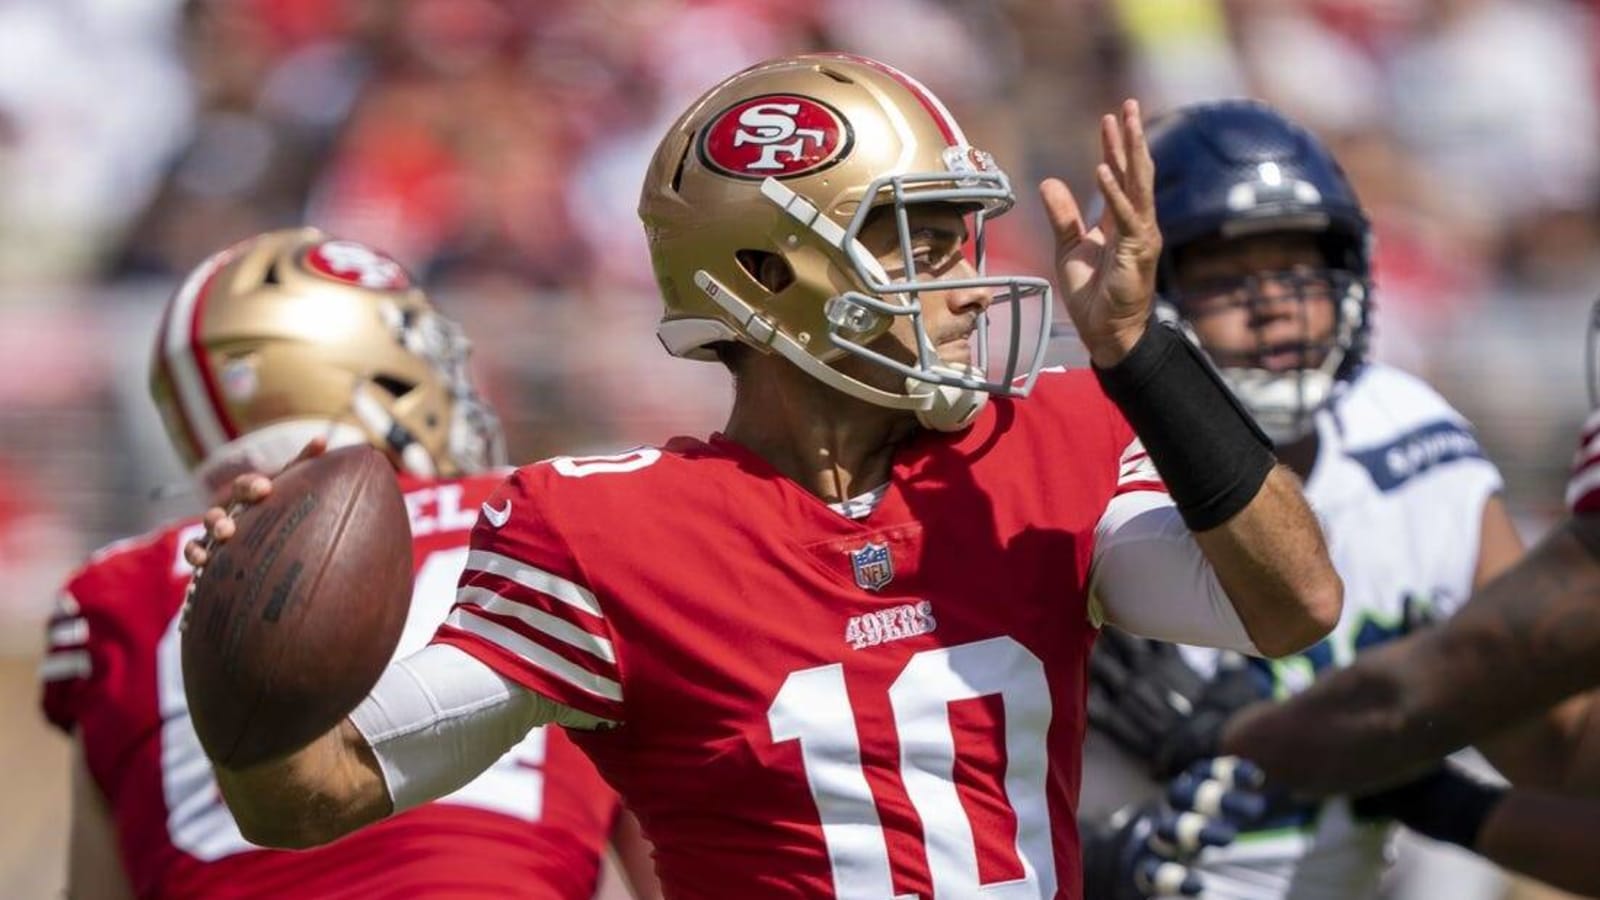 Jimmy Garoppolo made extra $350K for Week 2 win